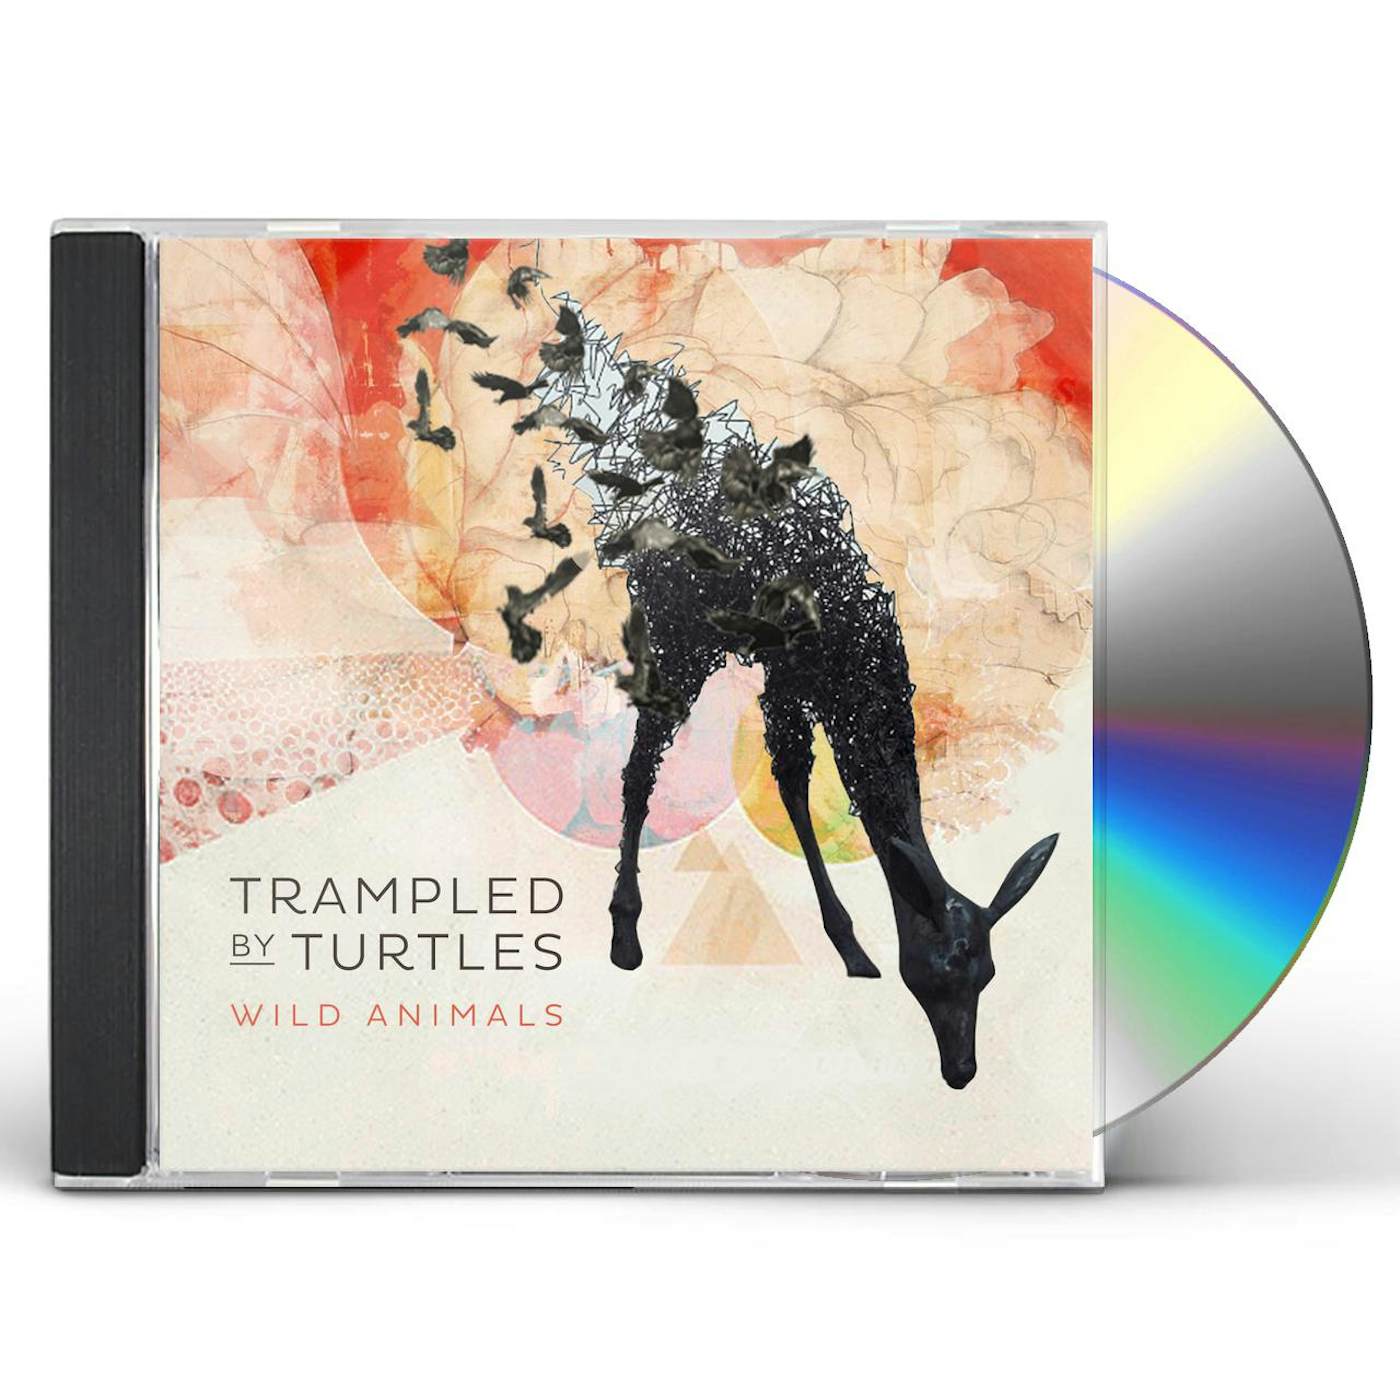 Trampled by Turtles WILD ANIMALS CD